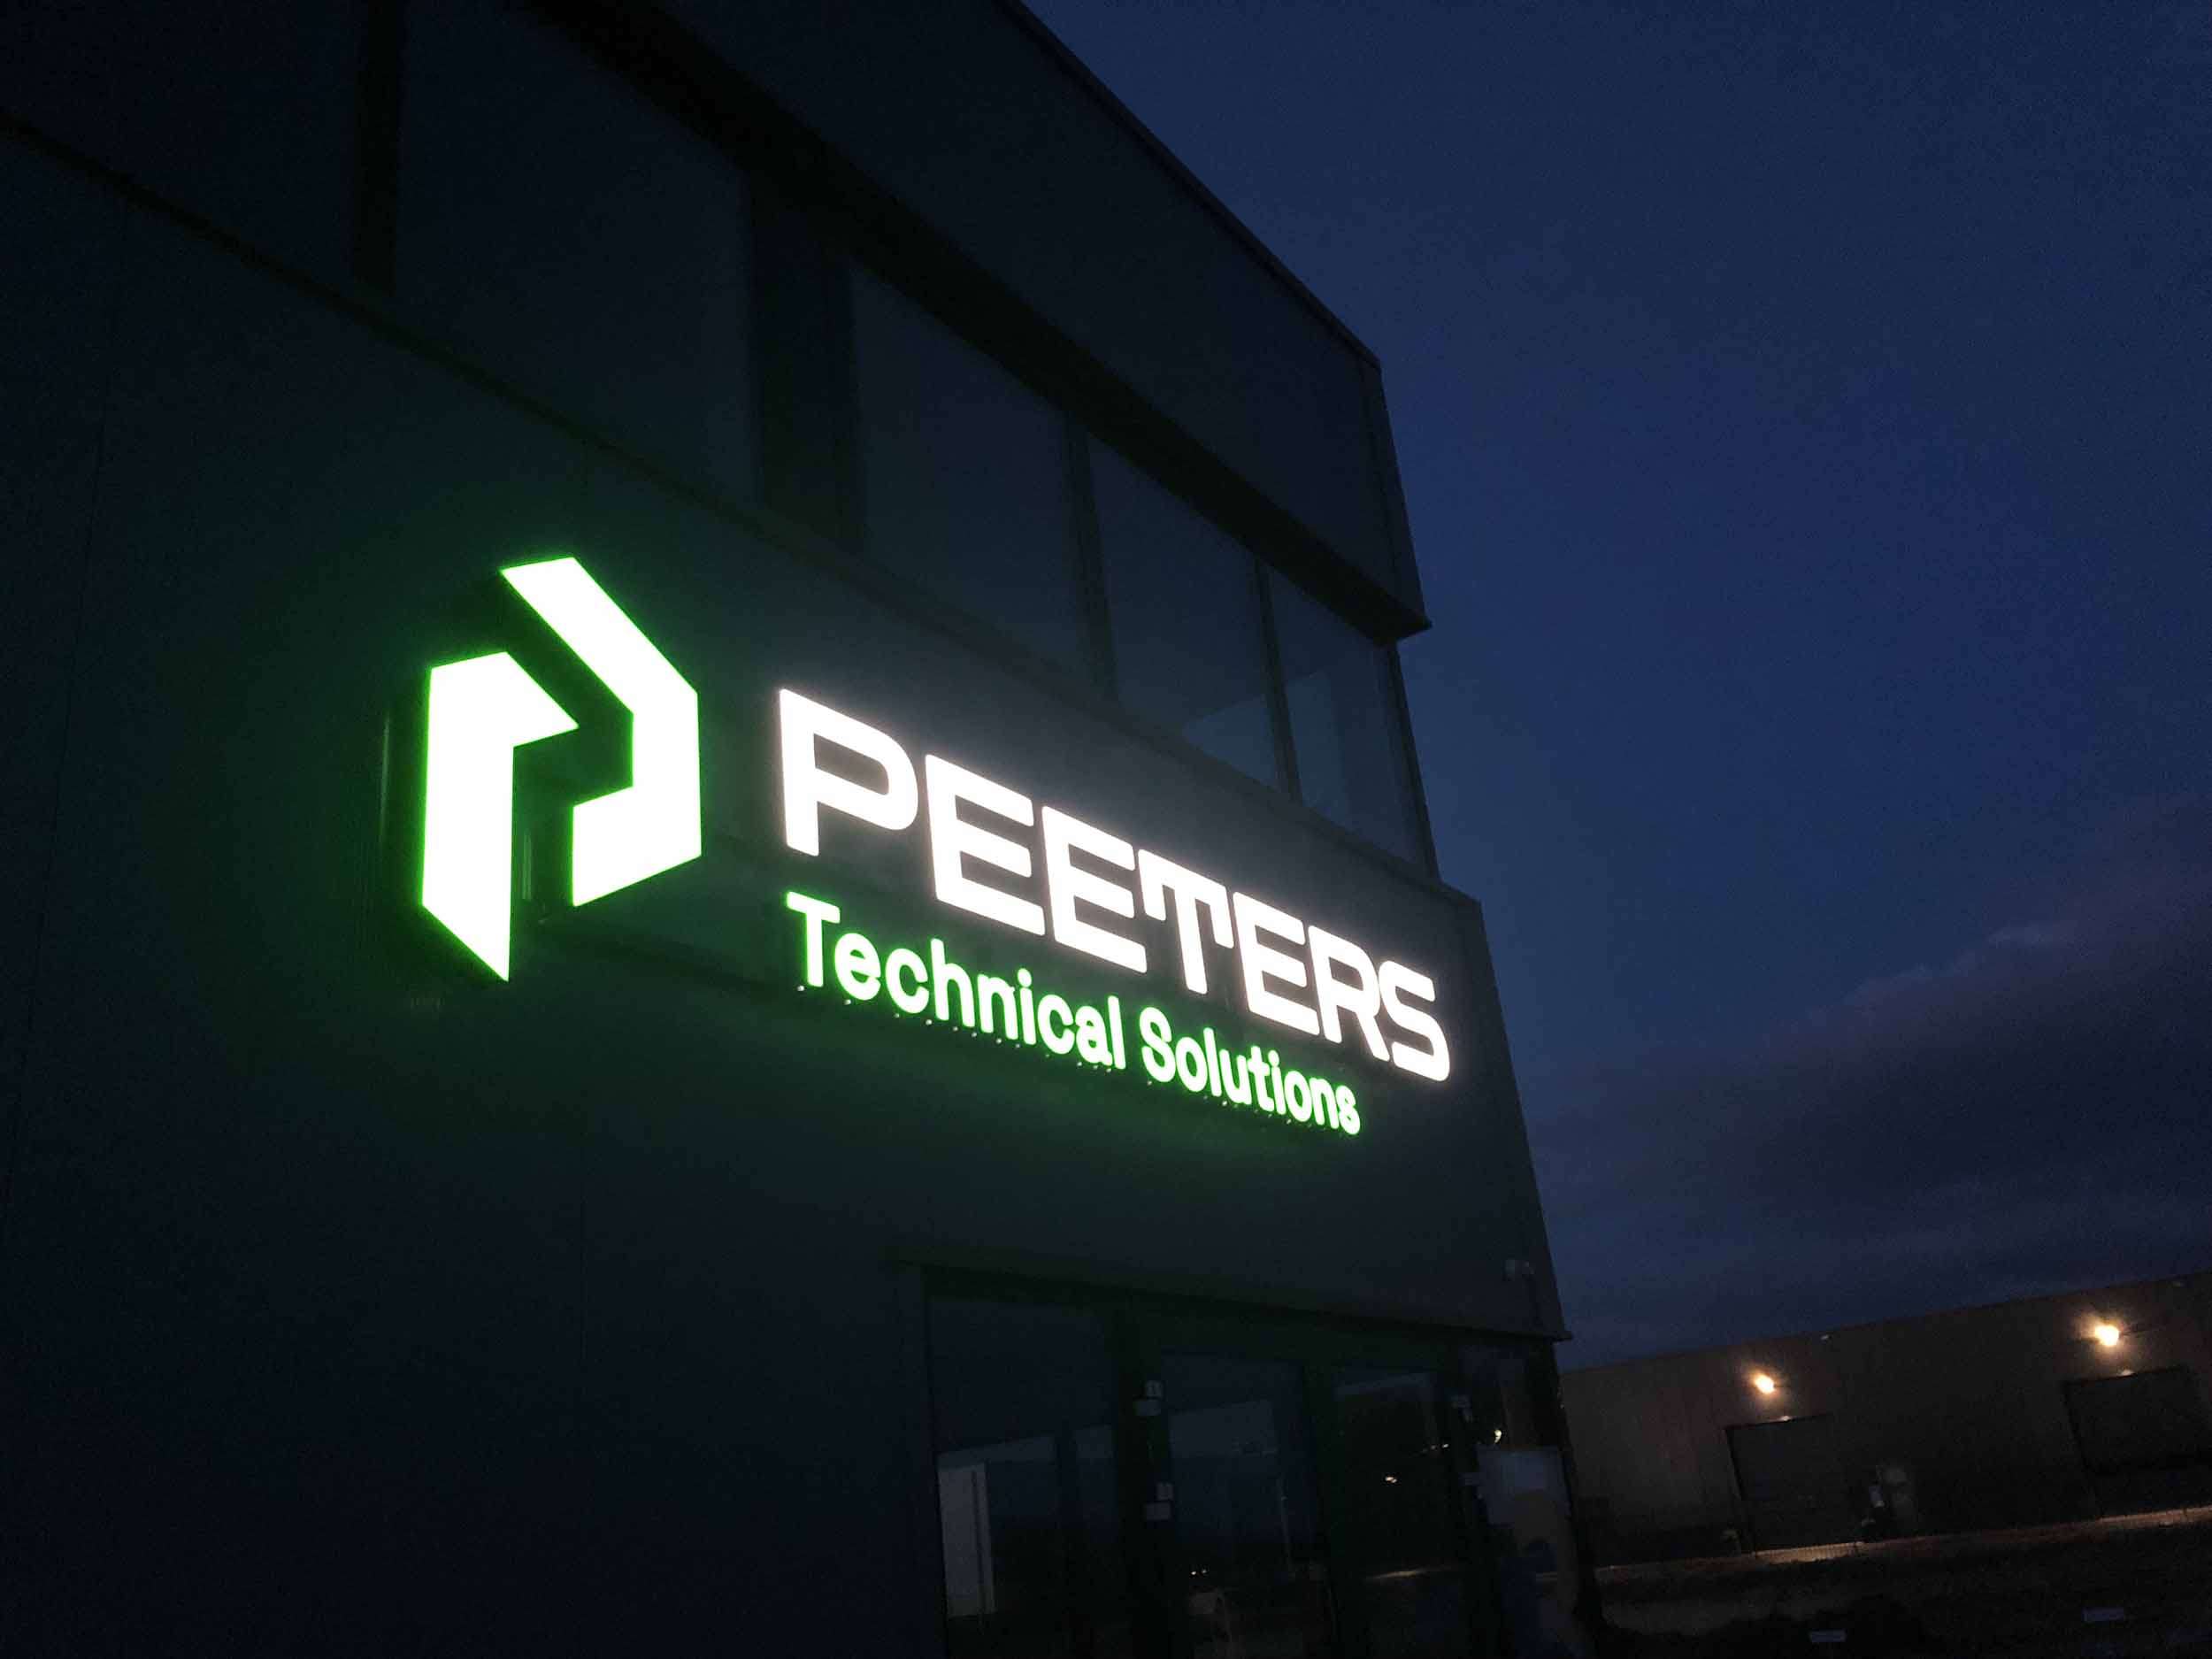 Lichtreclame Peeters Technical solutions